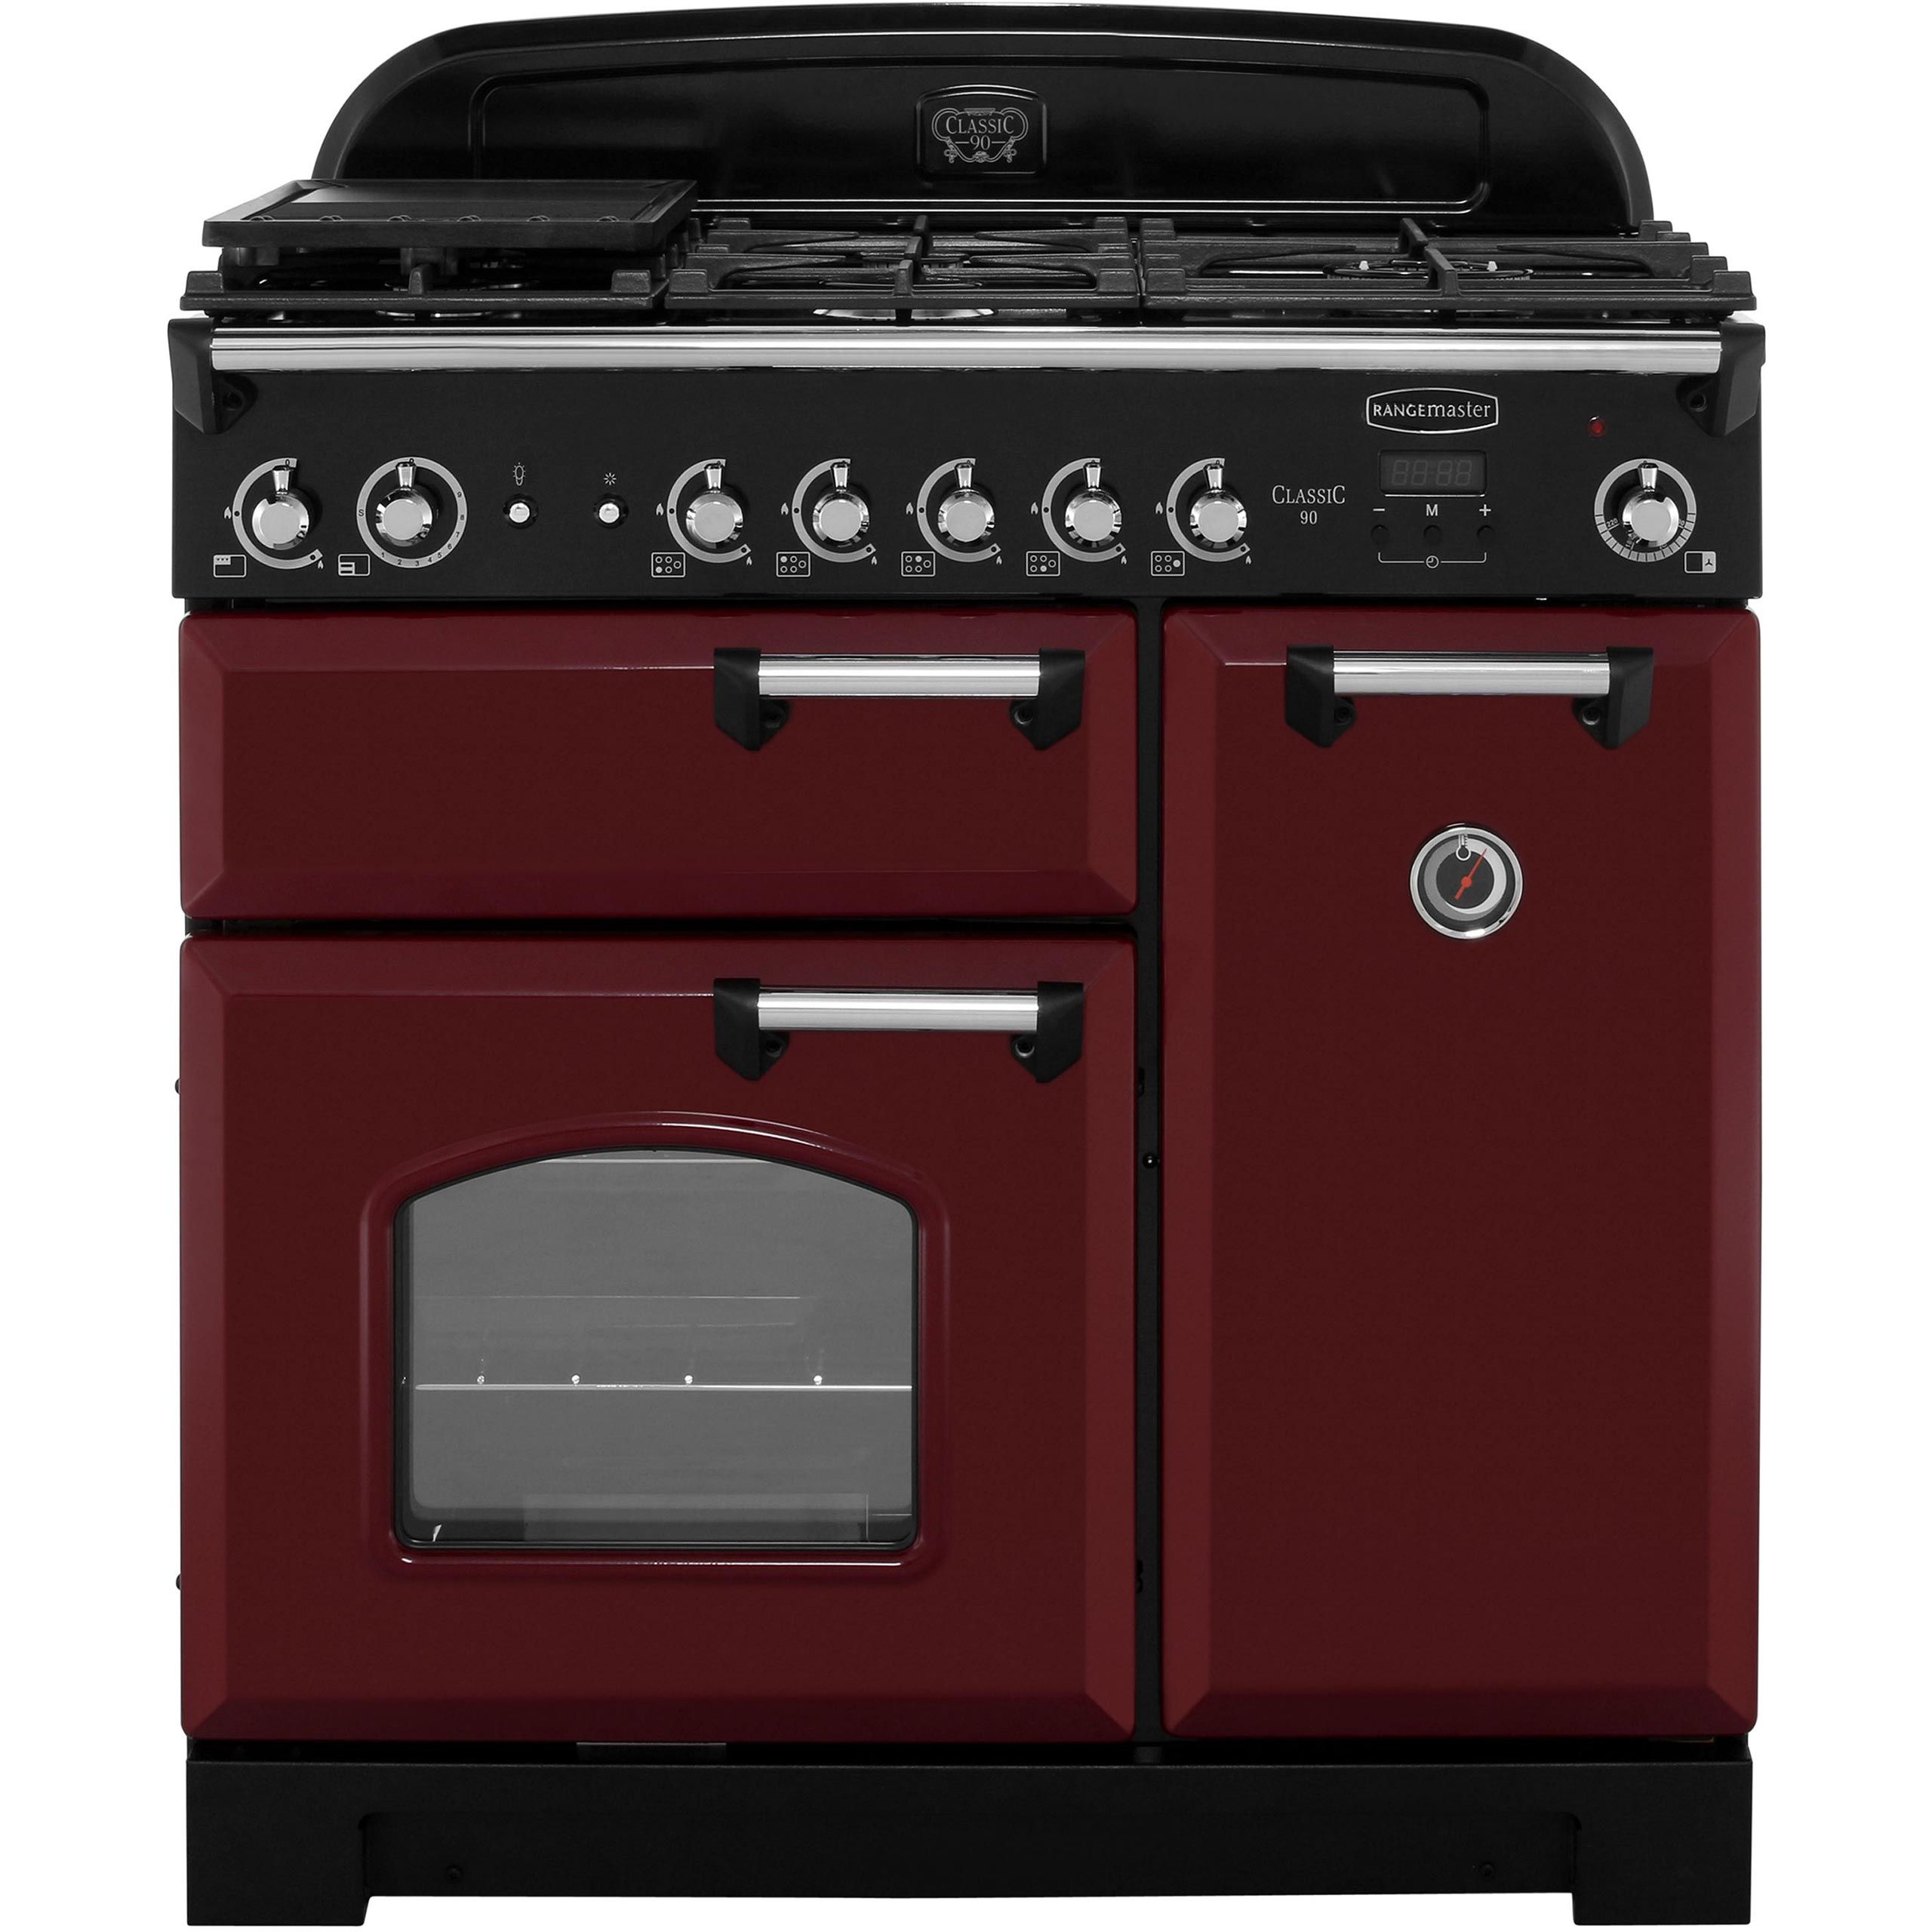 Rangemaster Classic CLA90NGFCY/C 90cm Gas Range Cooker with Electric Fan Oven - Cranberry / Chrome - A+/A Rated, Red